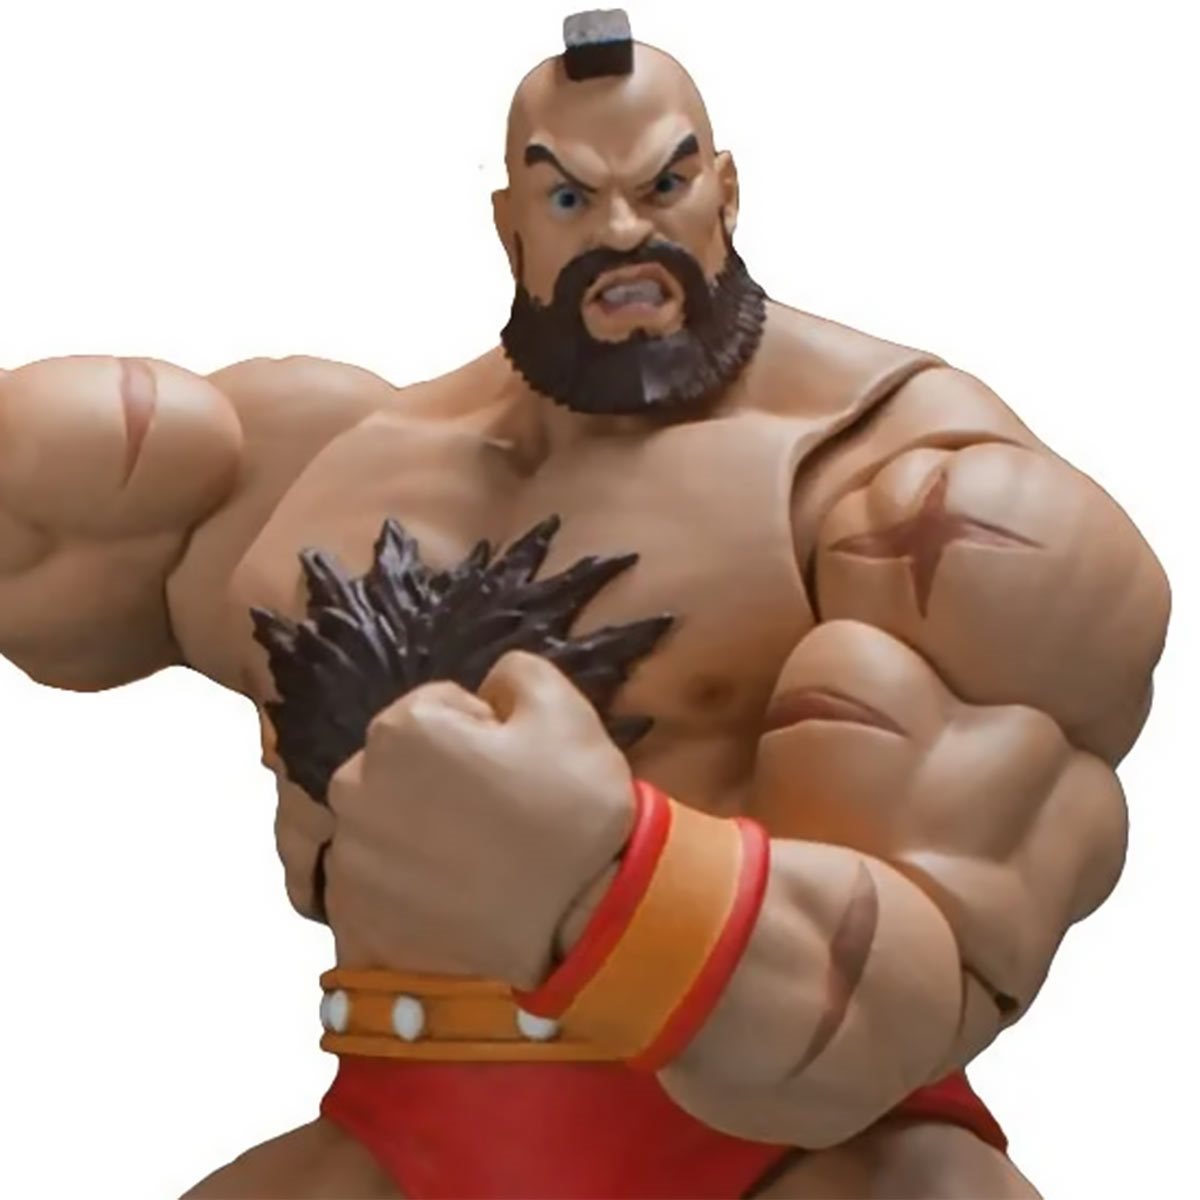 Street Fighter II Zangief 1/12 action figure Storm Collectibles U.S. seller